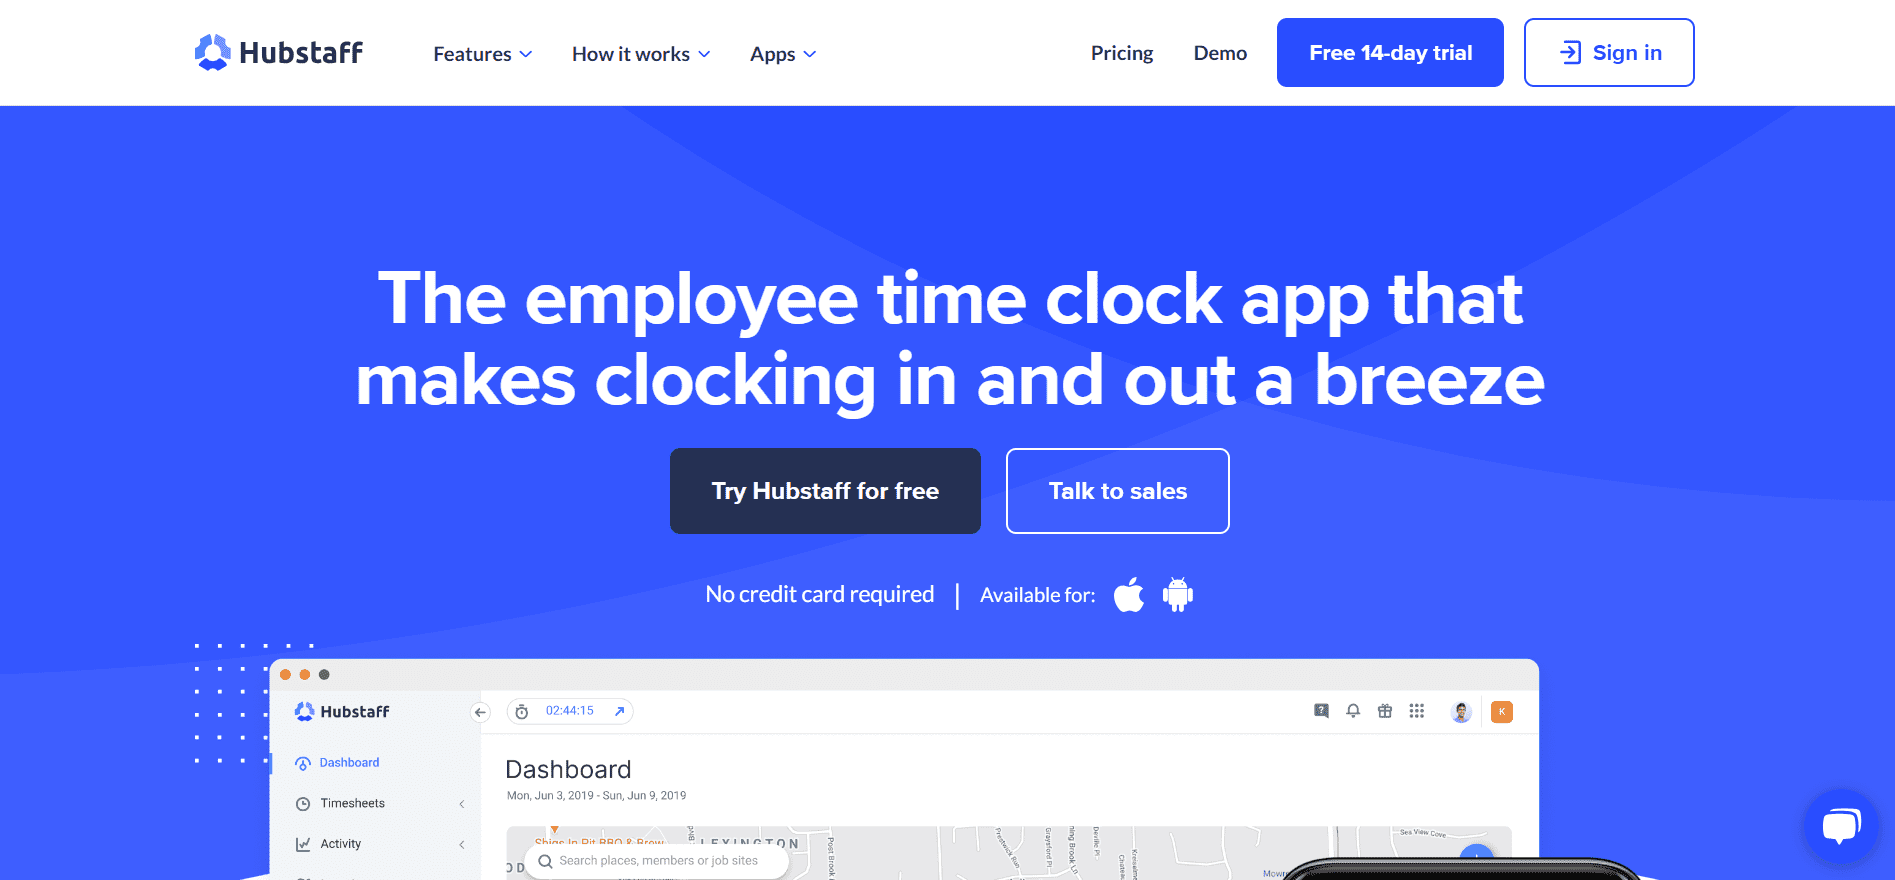 Homepage of another best time tracking app 'Hubstaff' saying "the employee time clock app that makes clocking in and out a breeze".